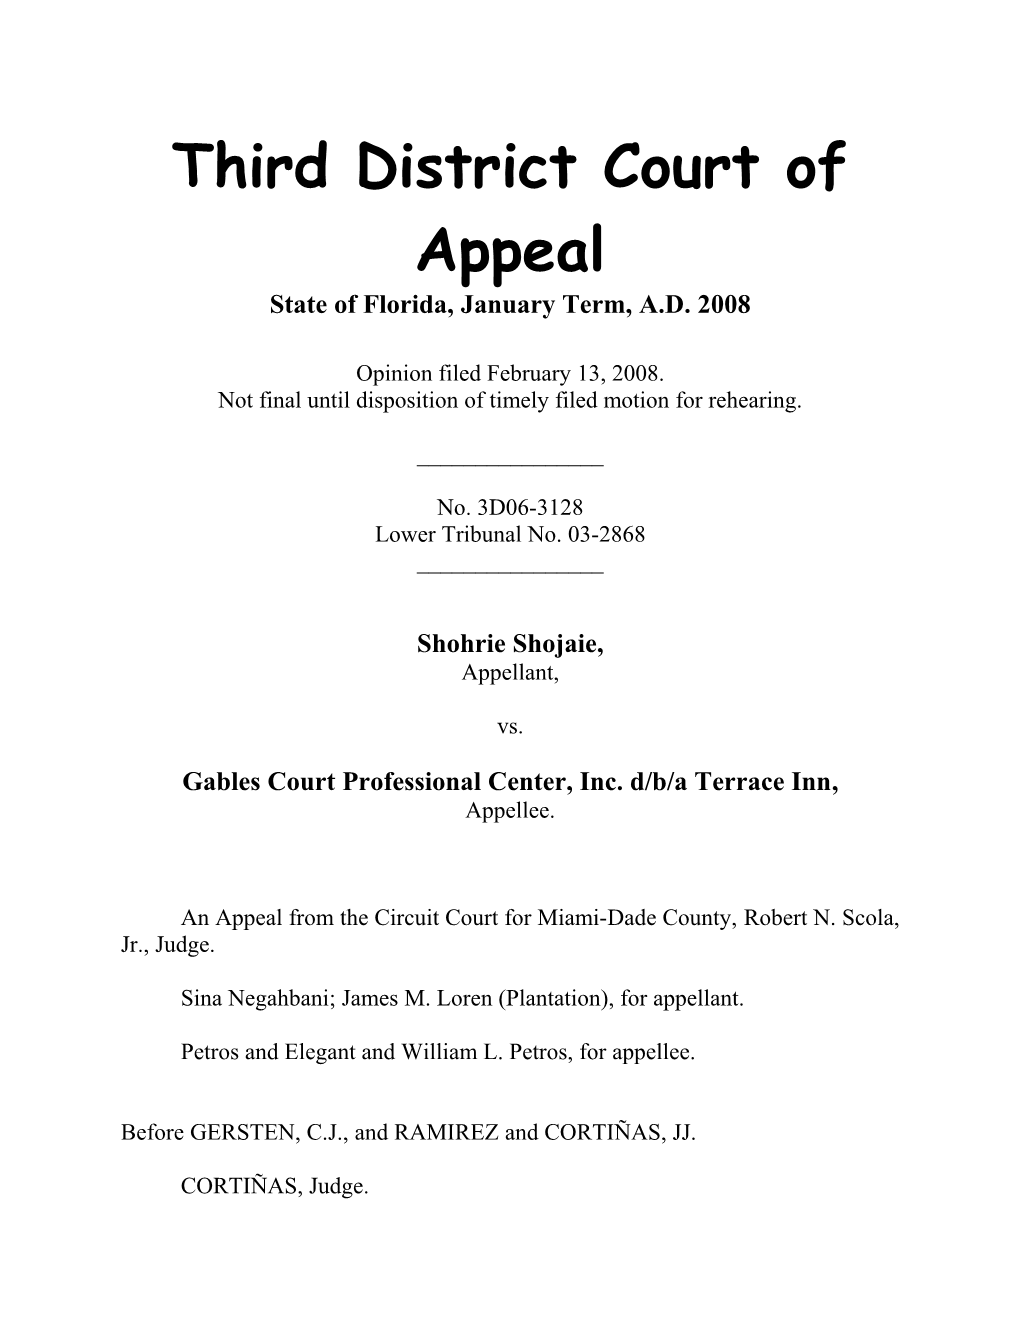 Third District Court of Appeal s3